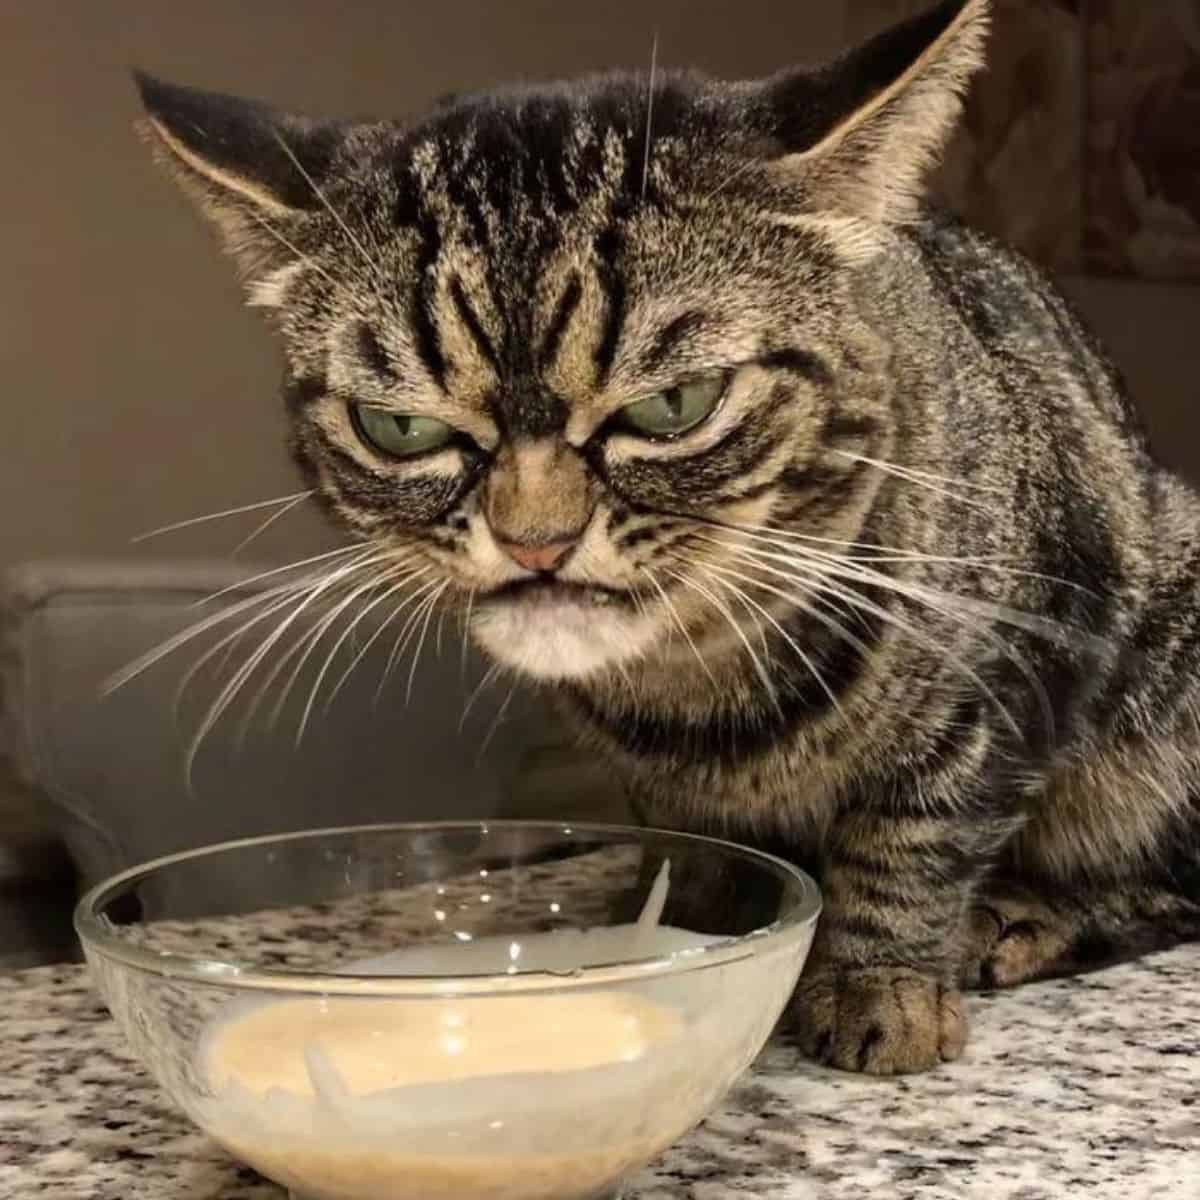 photo of the grumpy cat by a bowl